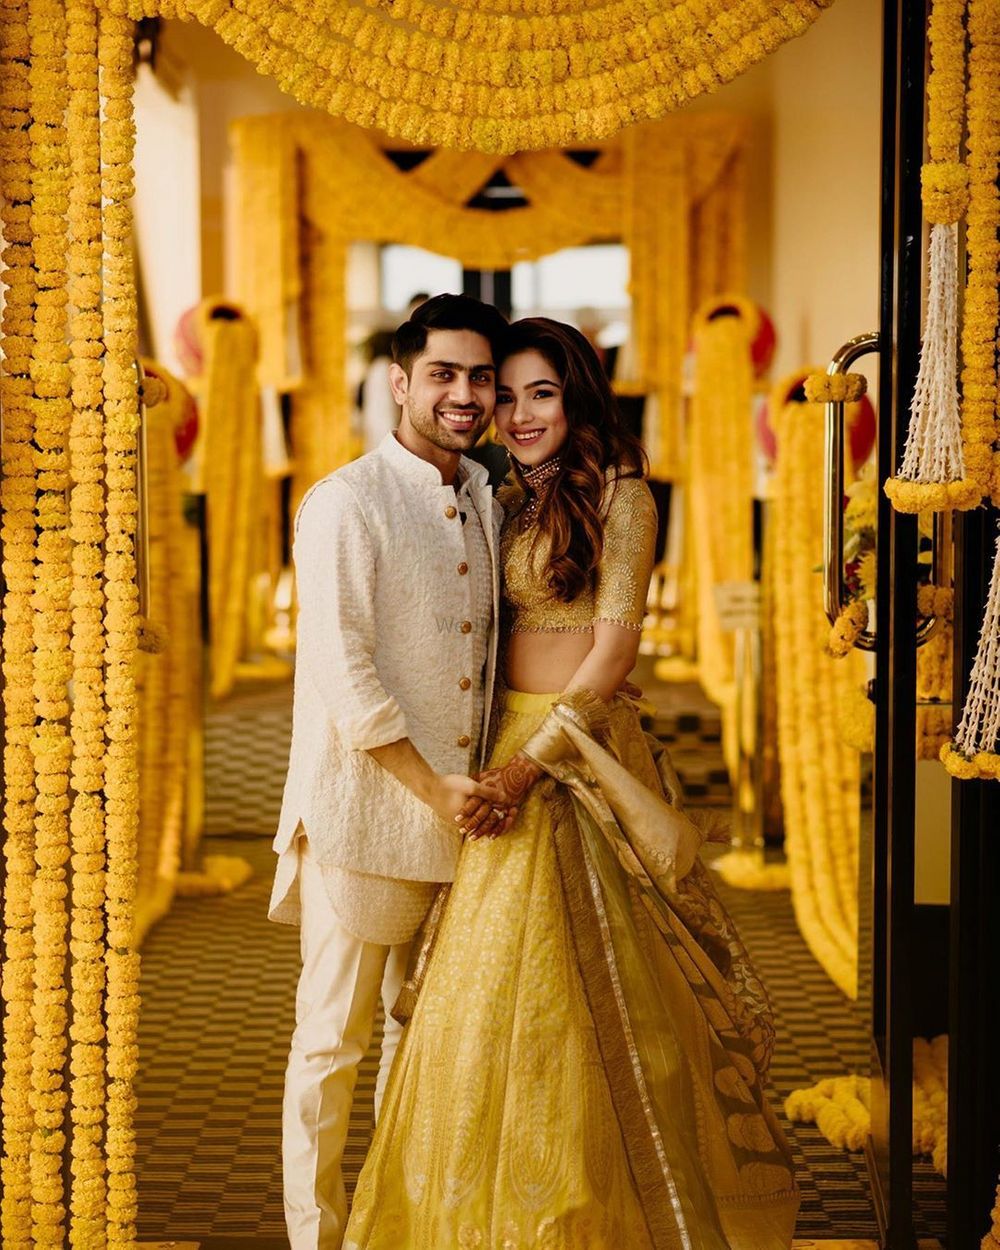 Photo of A bride and groom portrait with genda phool decor in the backdrop